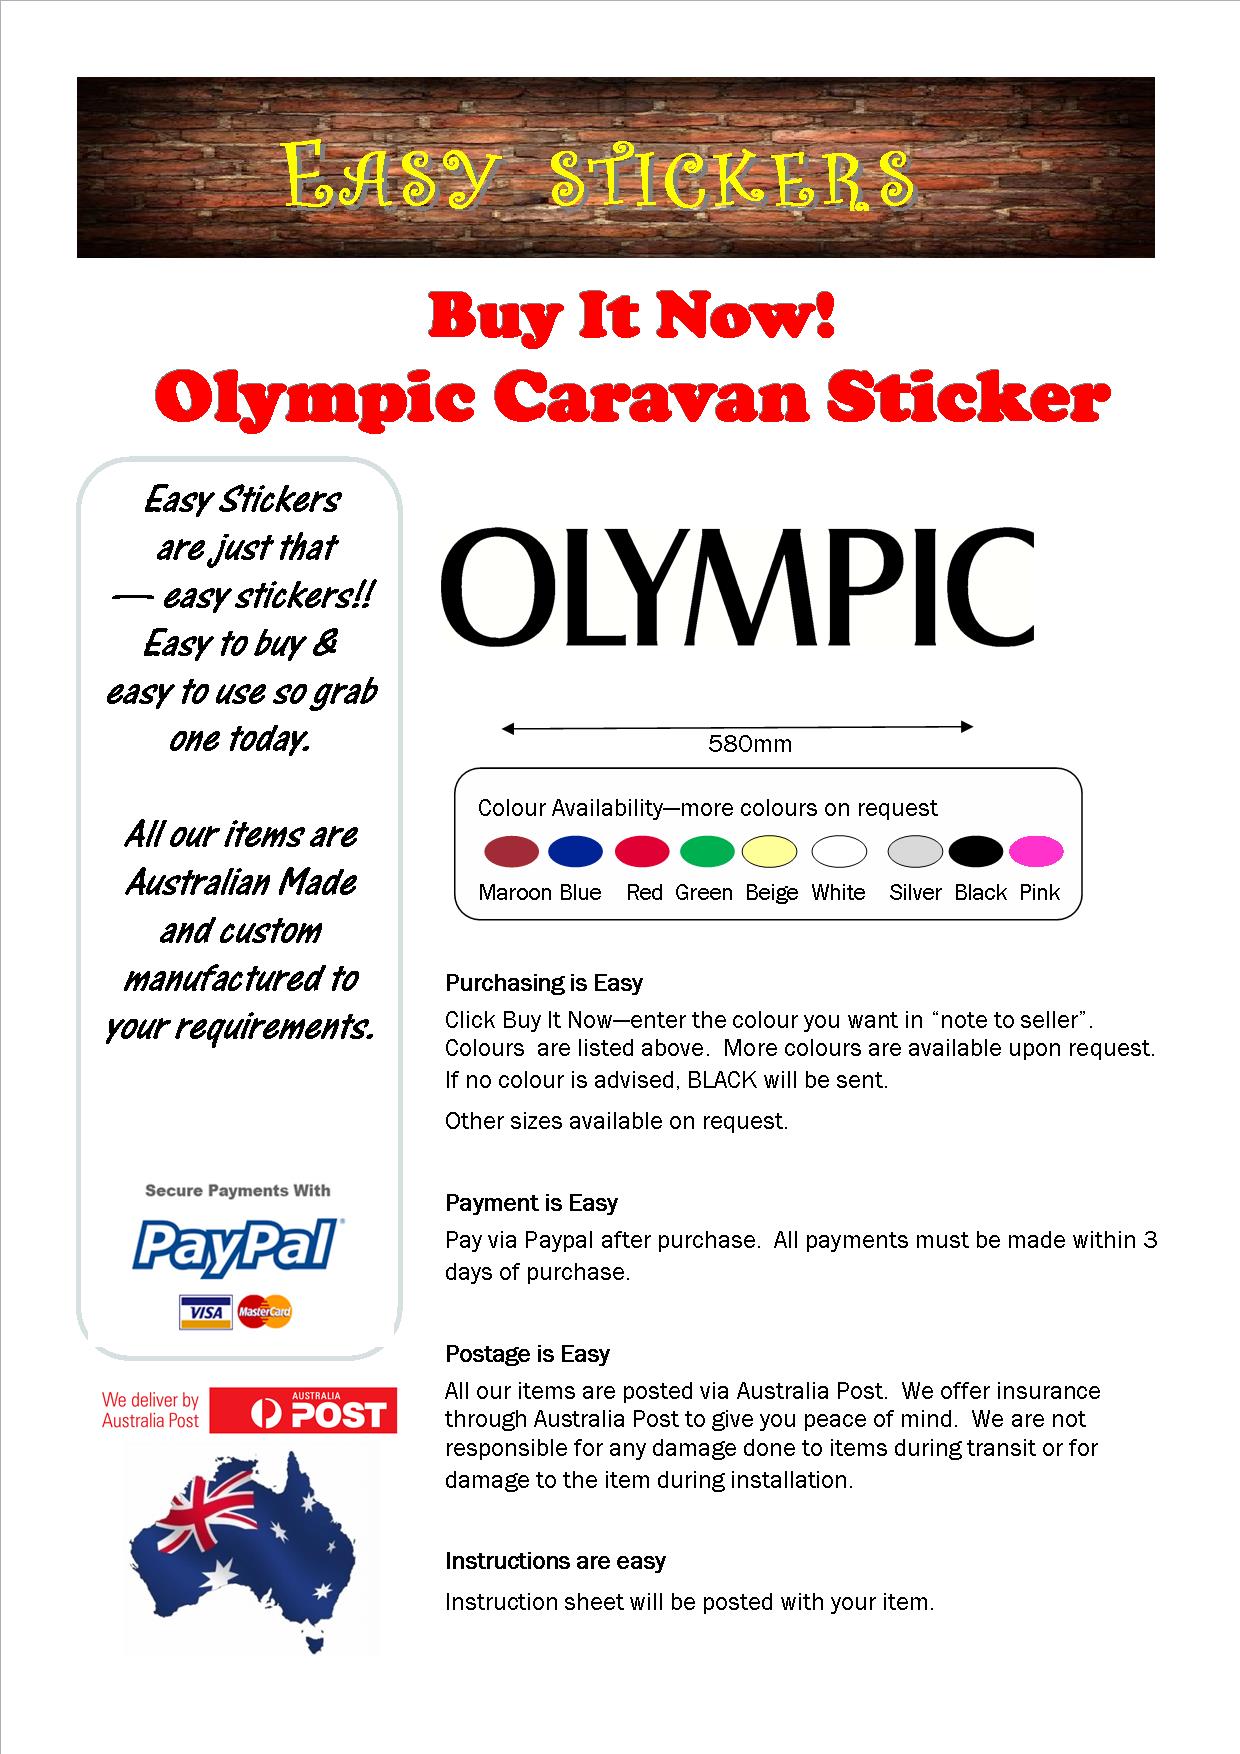 Ebay Template 580mm olympic text.jpg  by easystickers